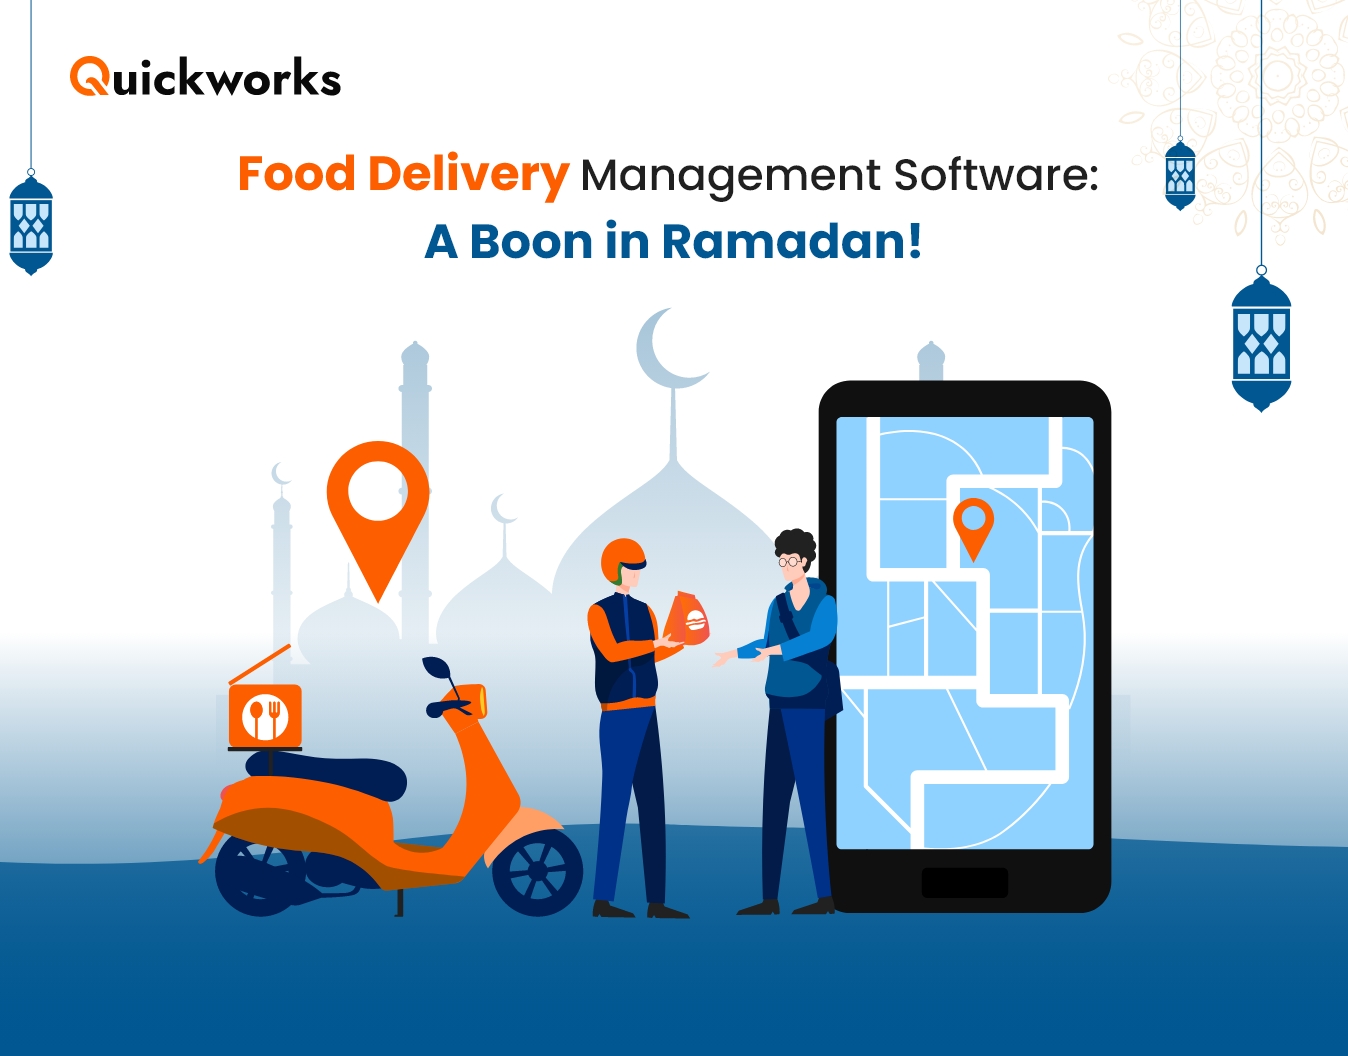 on-demand food delivery software